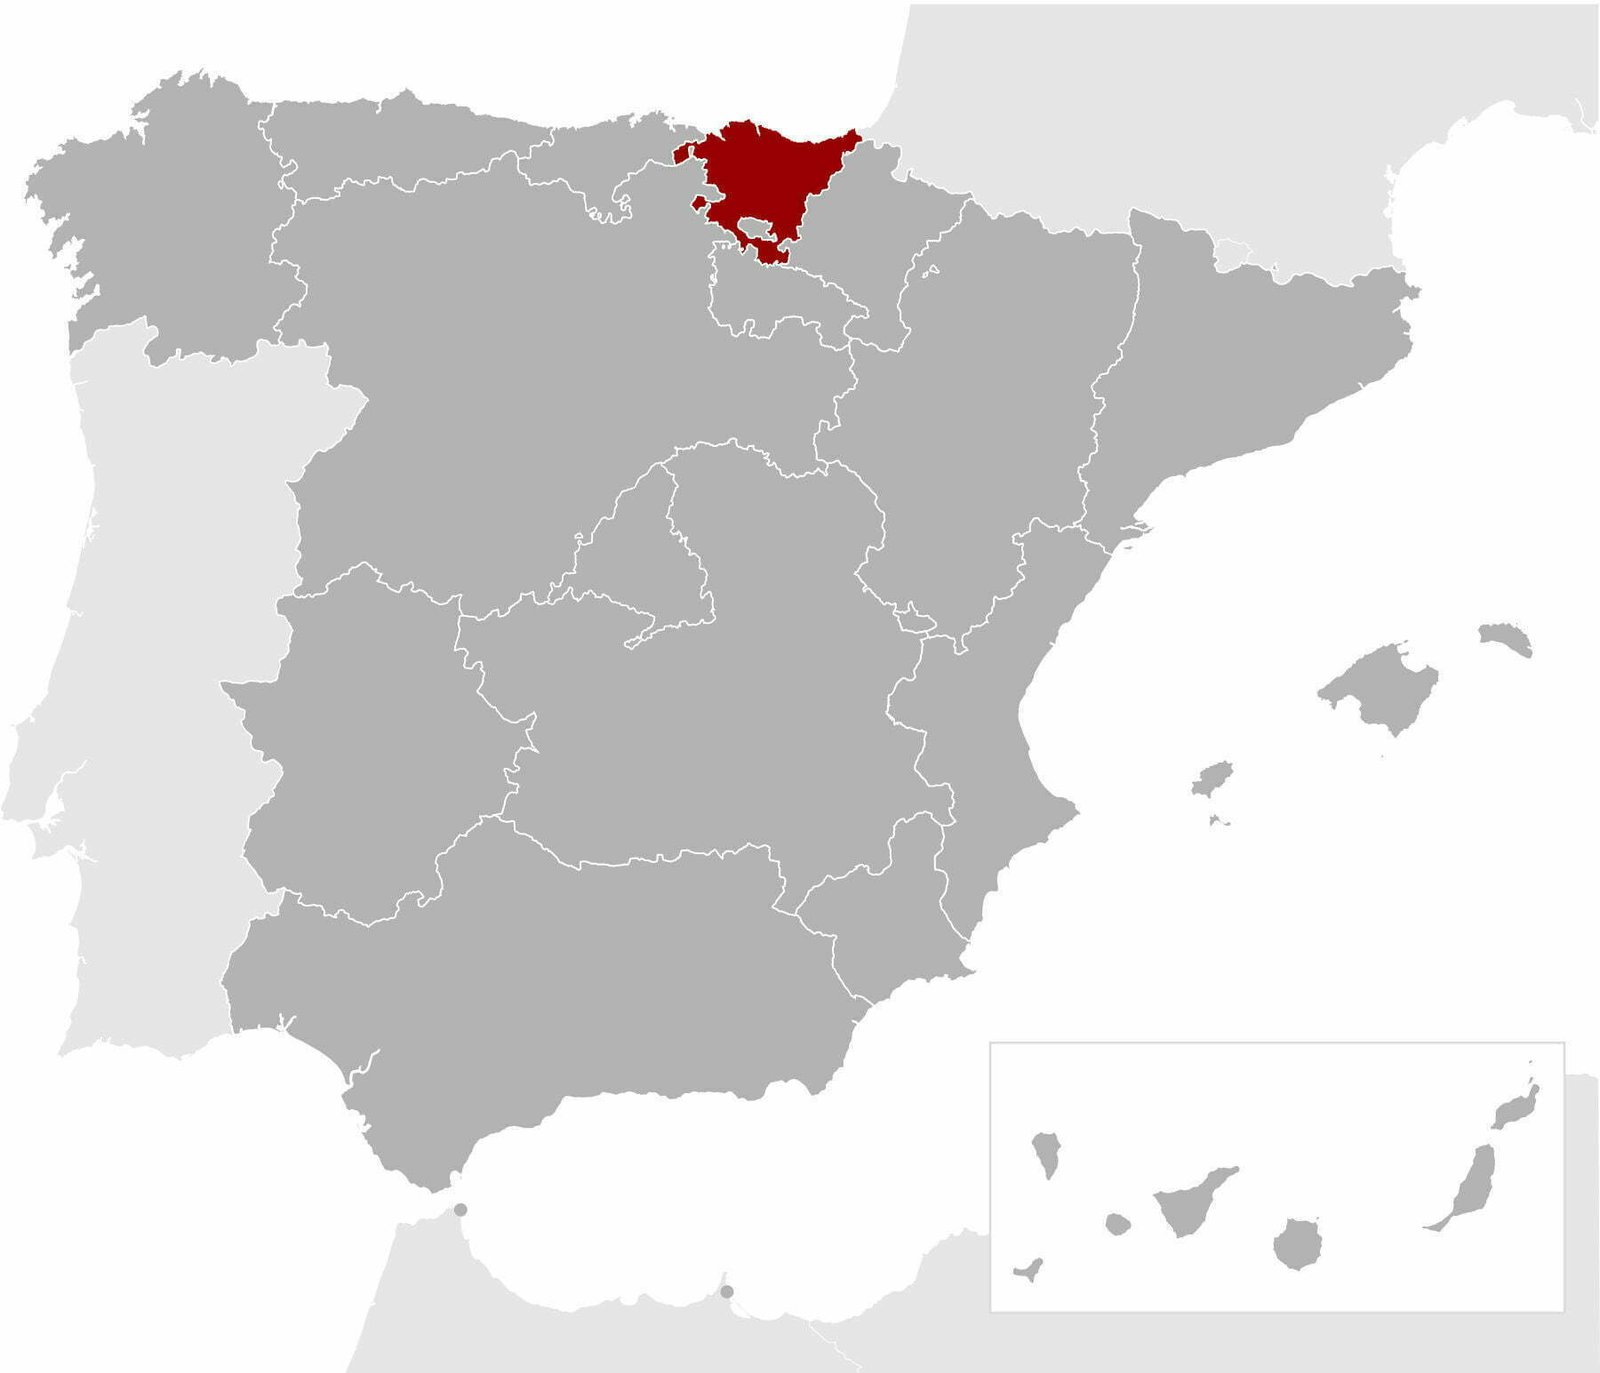 infographic displaying the Basque Country region of Spain